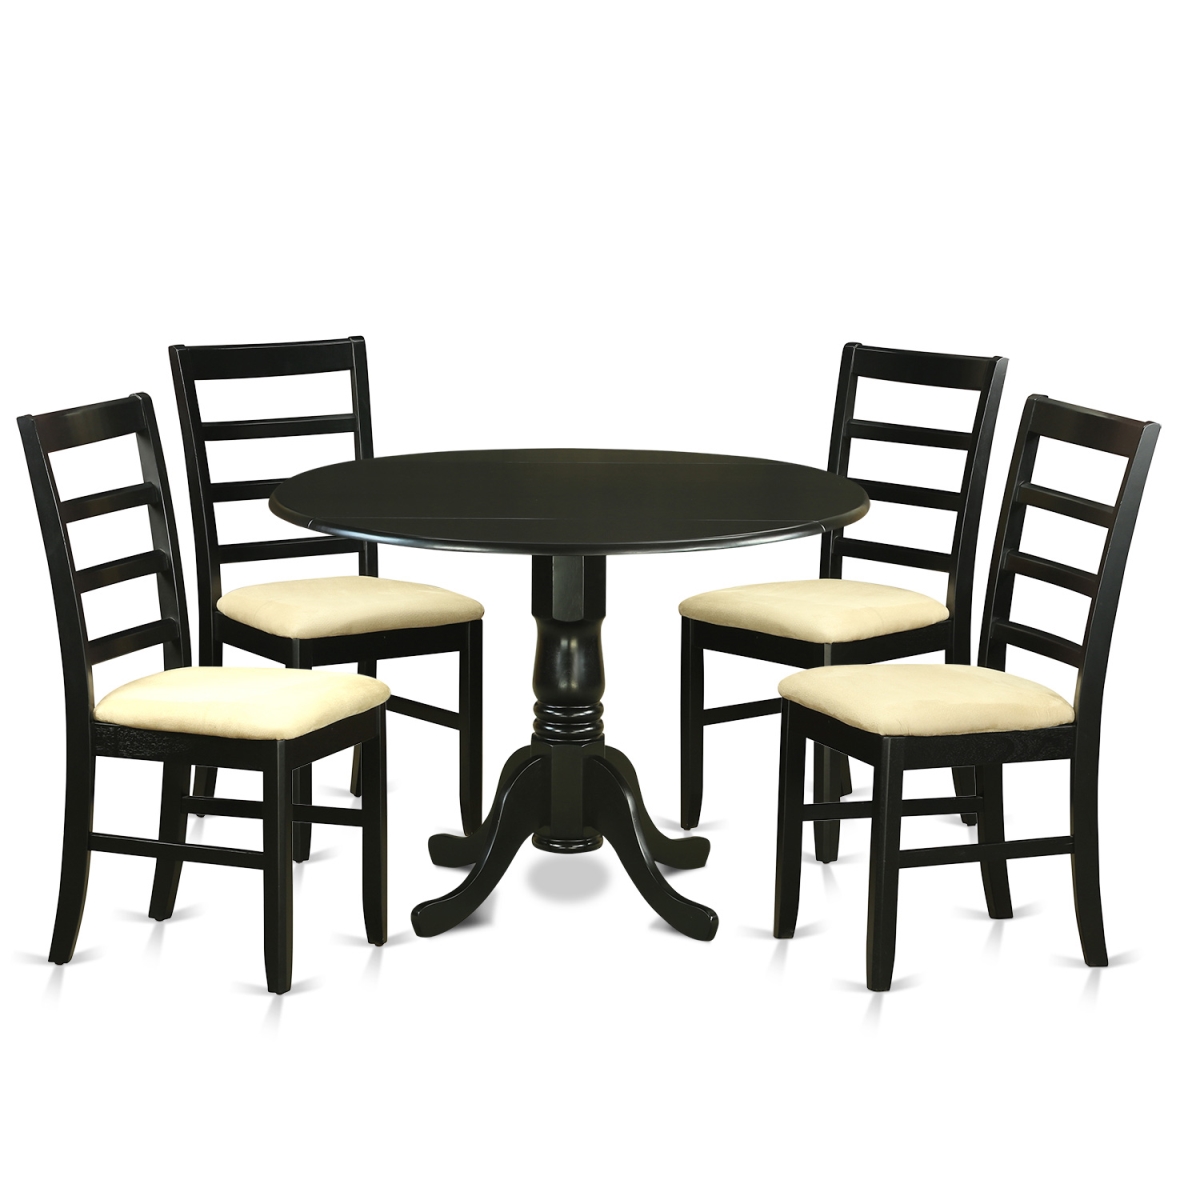 Picture of East West Furniture DLPF5-BLK-C Kitchen Table Set - Small Kitchen Table & 4 Chairs, Black - 5 Piece